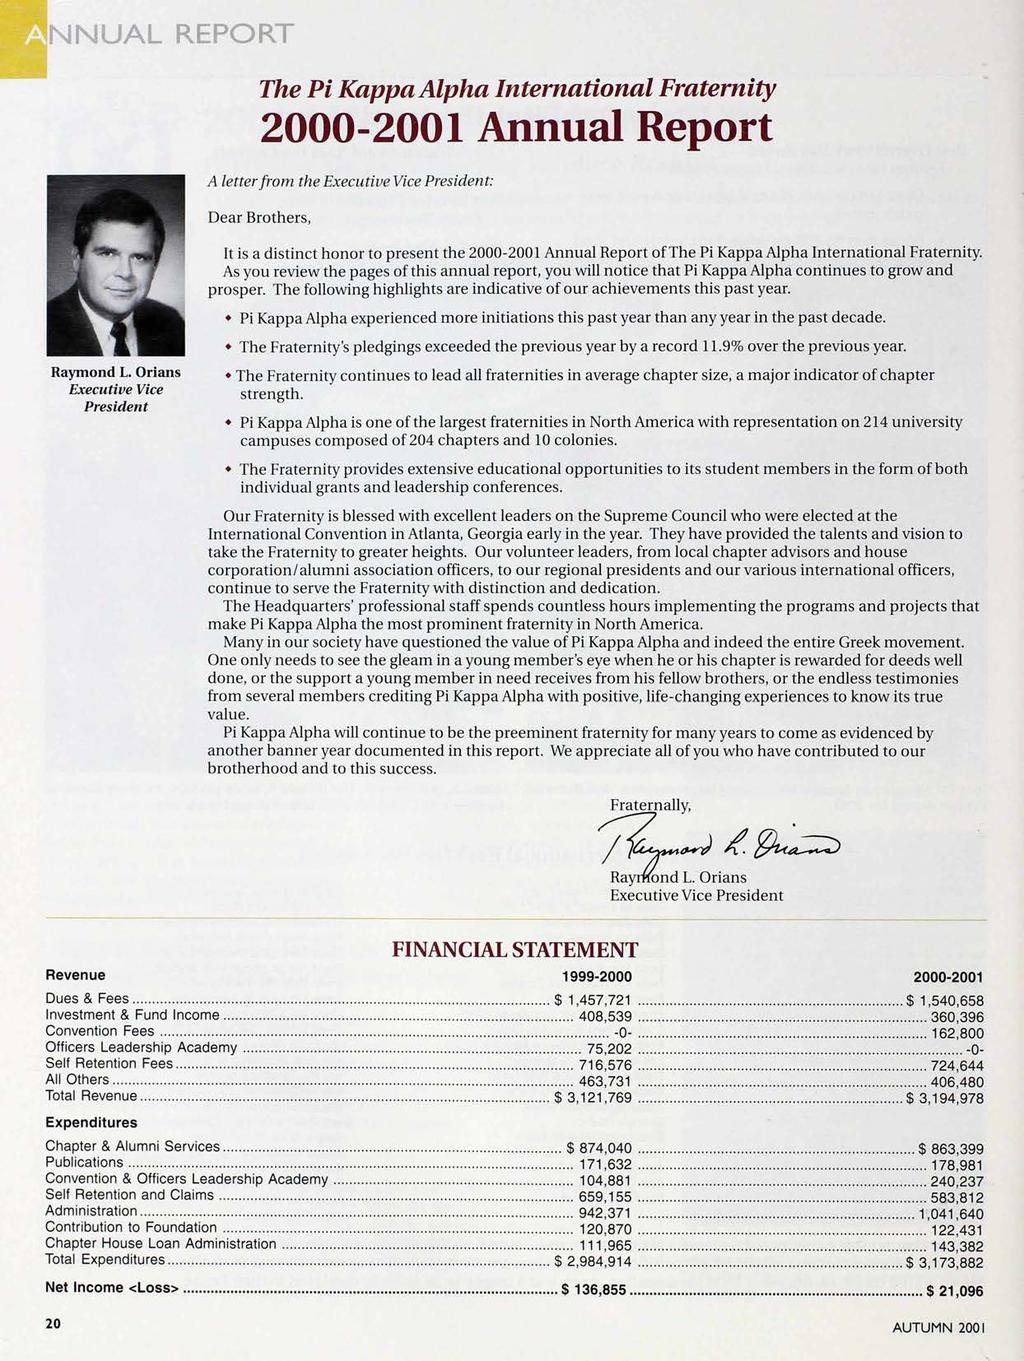 NNUAL REPORT The Pi Kappa Alpha International Fraternity 2000-2001 Annual Report A letter from the Executive Vice President: Dear Brothers, Raymond L.